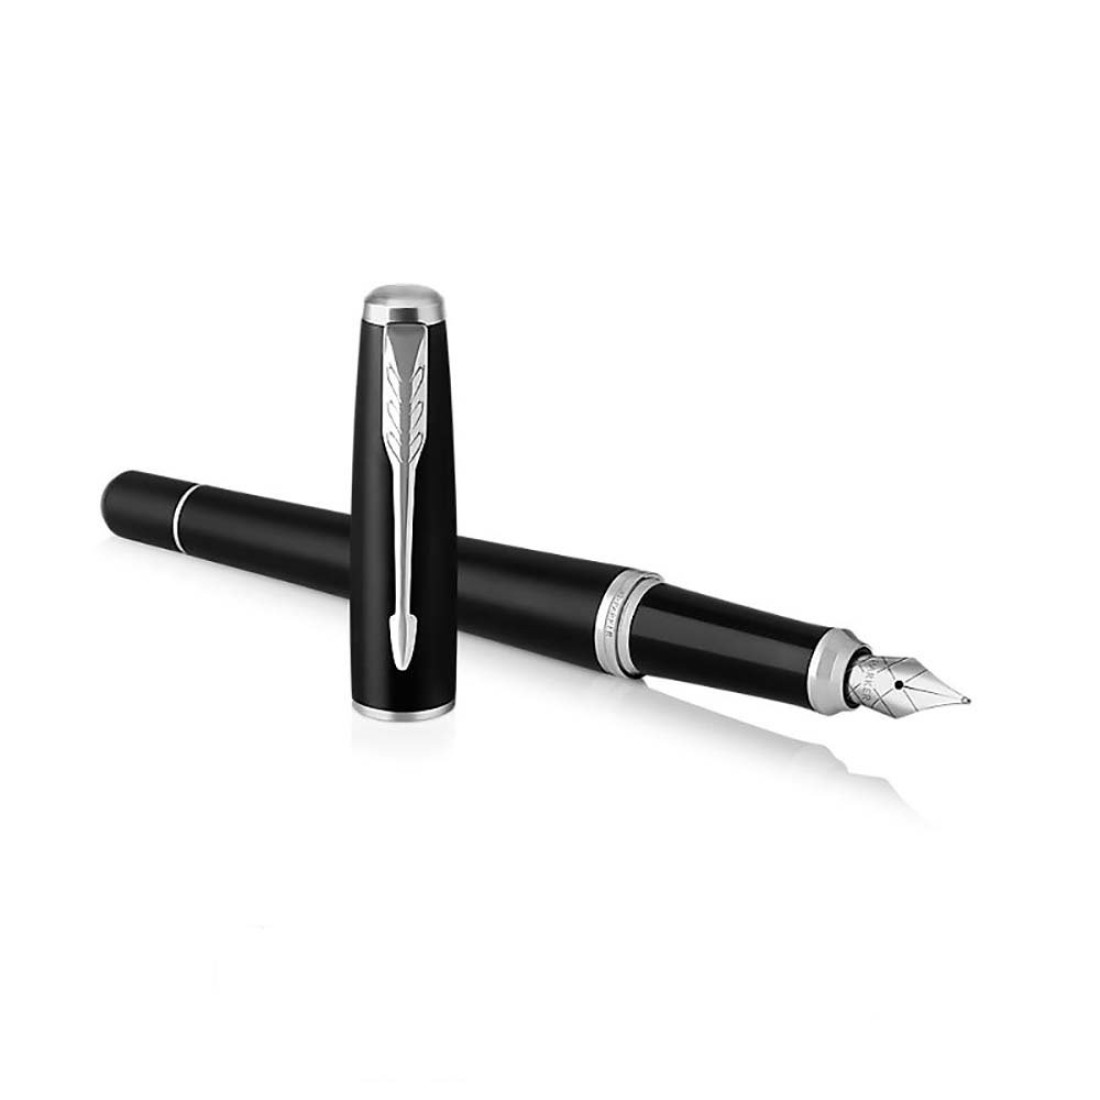 Parker Urban Classic Muted Black CT Fountain pen